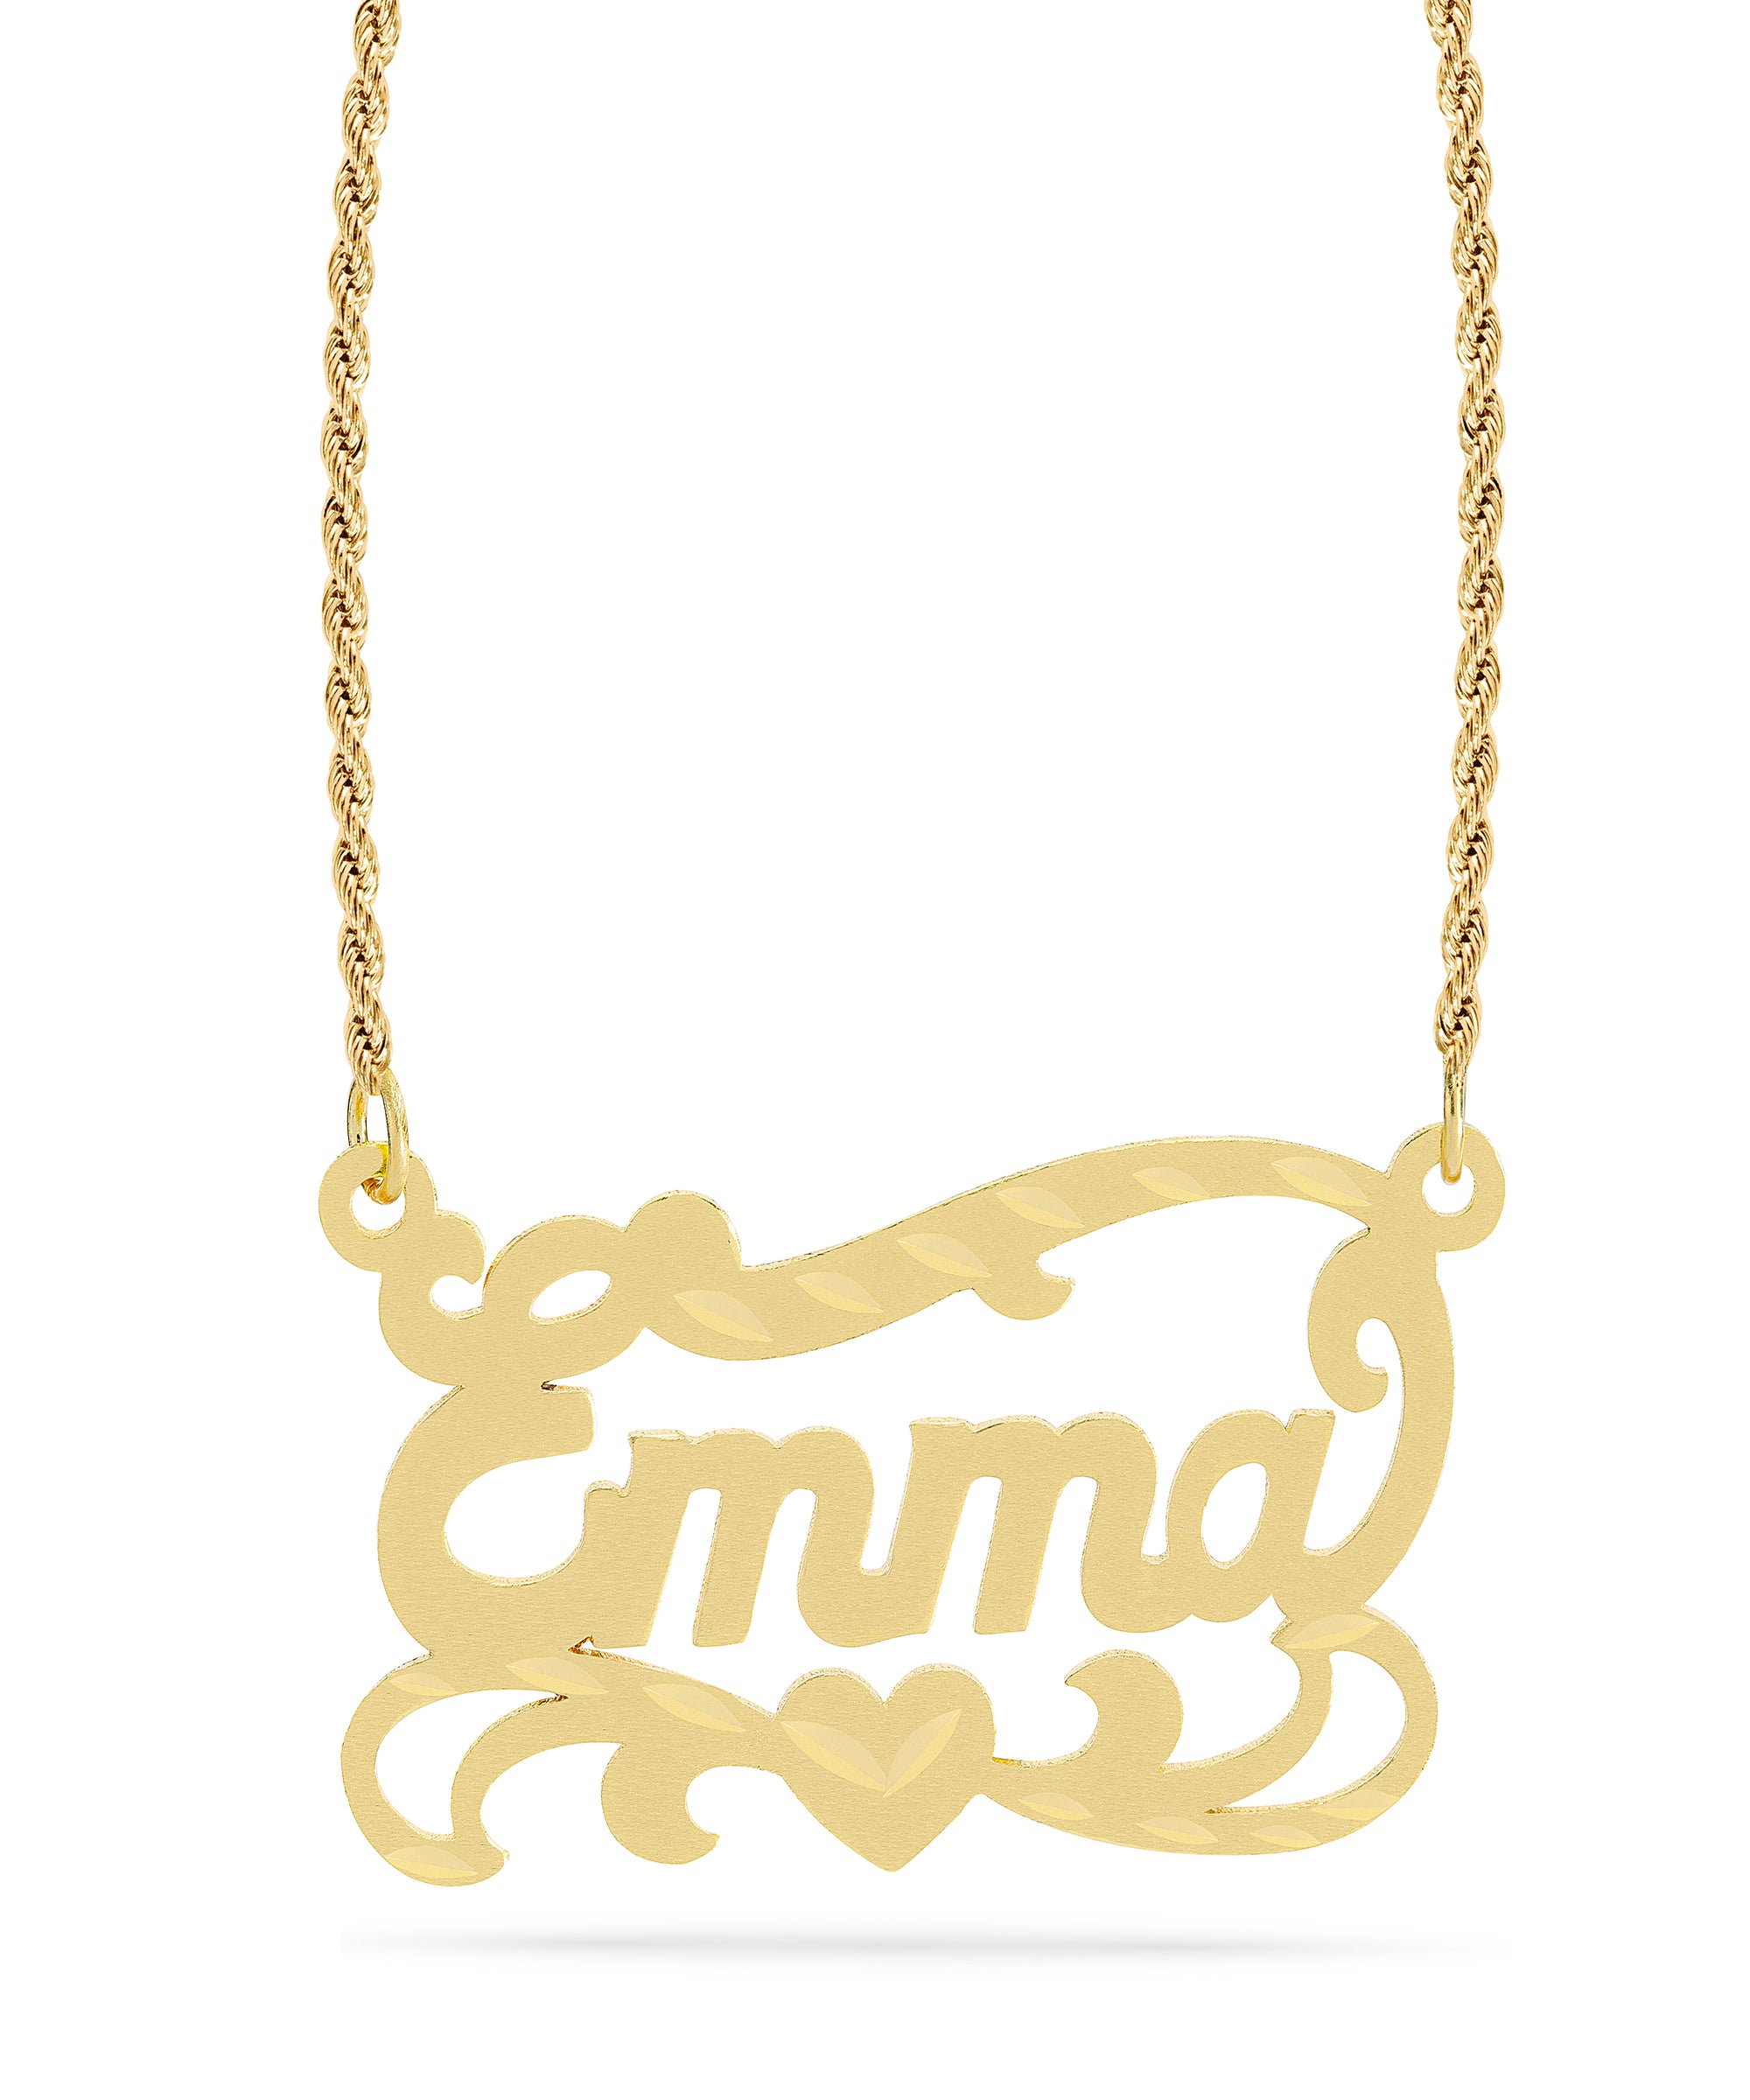 Personalized Name necklace with  Diamond Cut and Satin Finish "Emma"